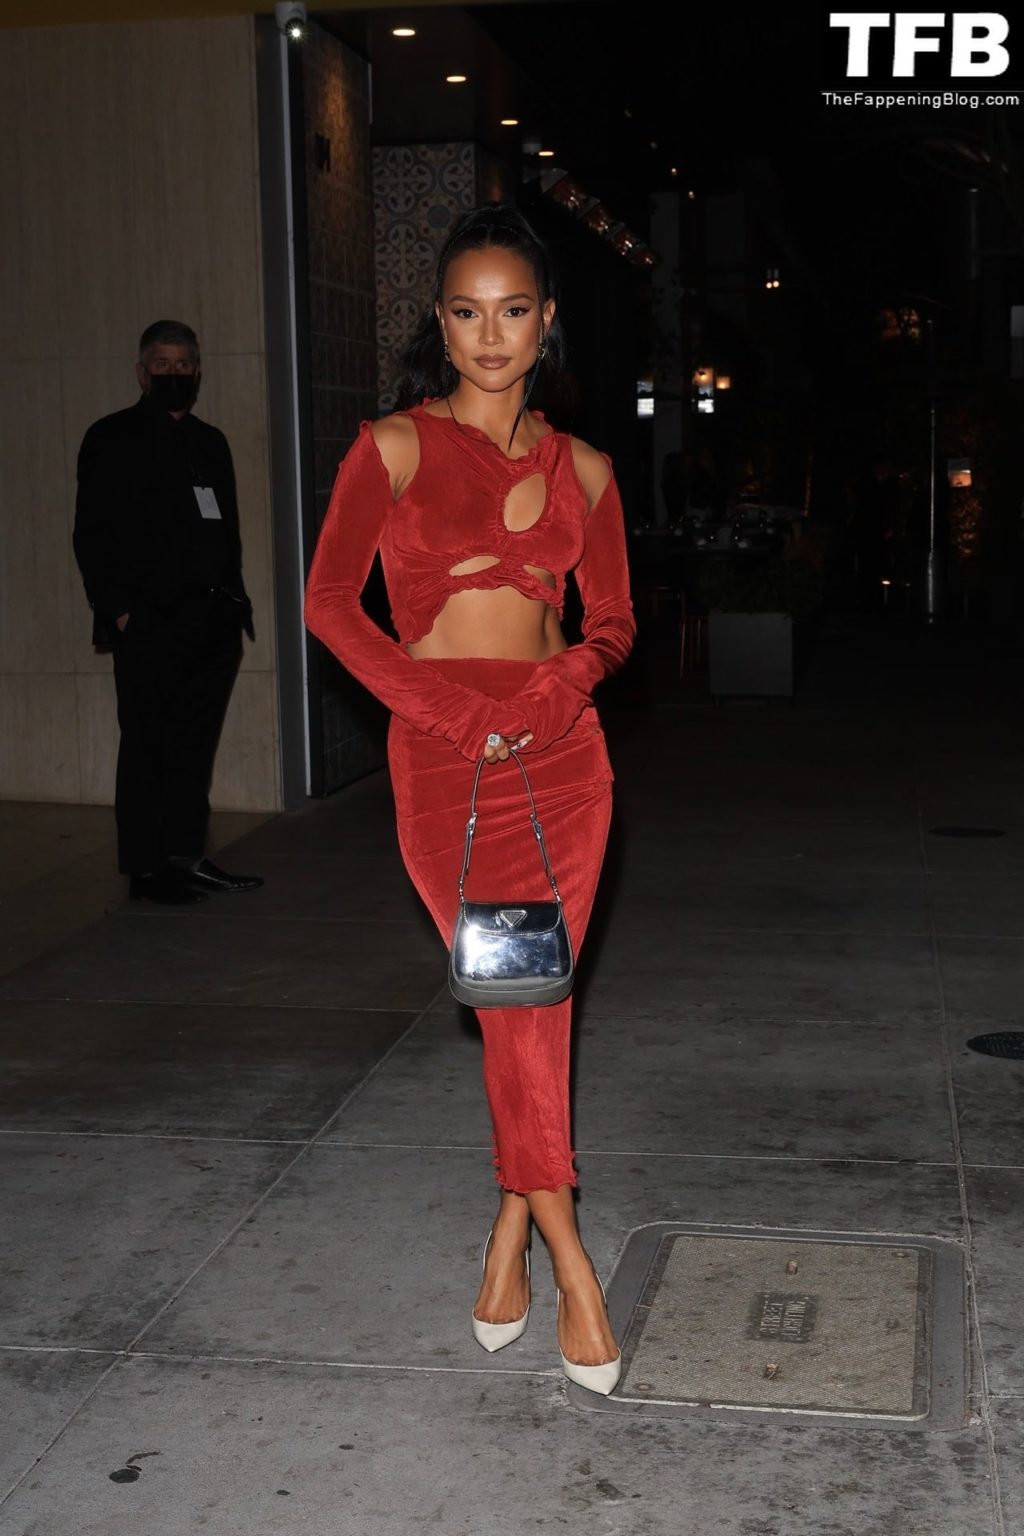 Karrueche Tran Sexy The Fappening Blog 8 1 1024x1536 - Karrueche Tran Shows Her Pokies in a Red Dress at The Hollywood Reporter’s Oscar Nominees Night (68 Photos)